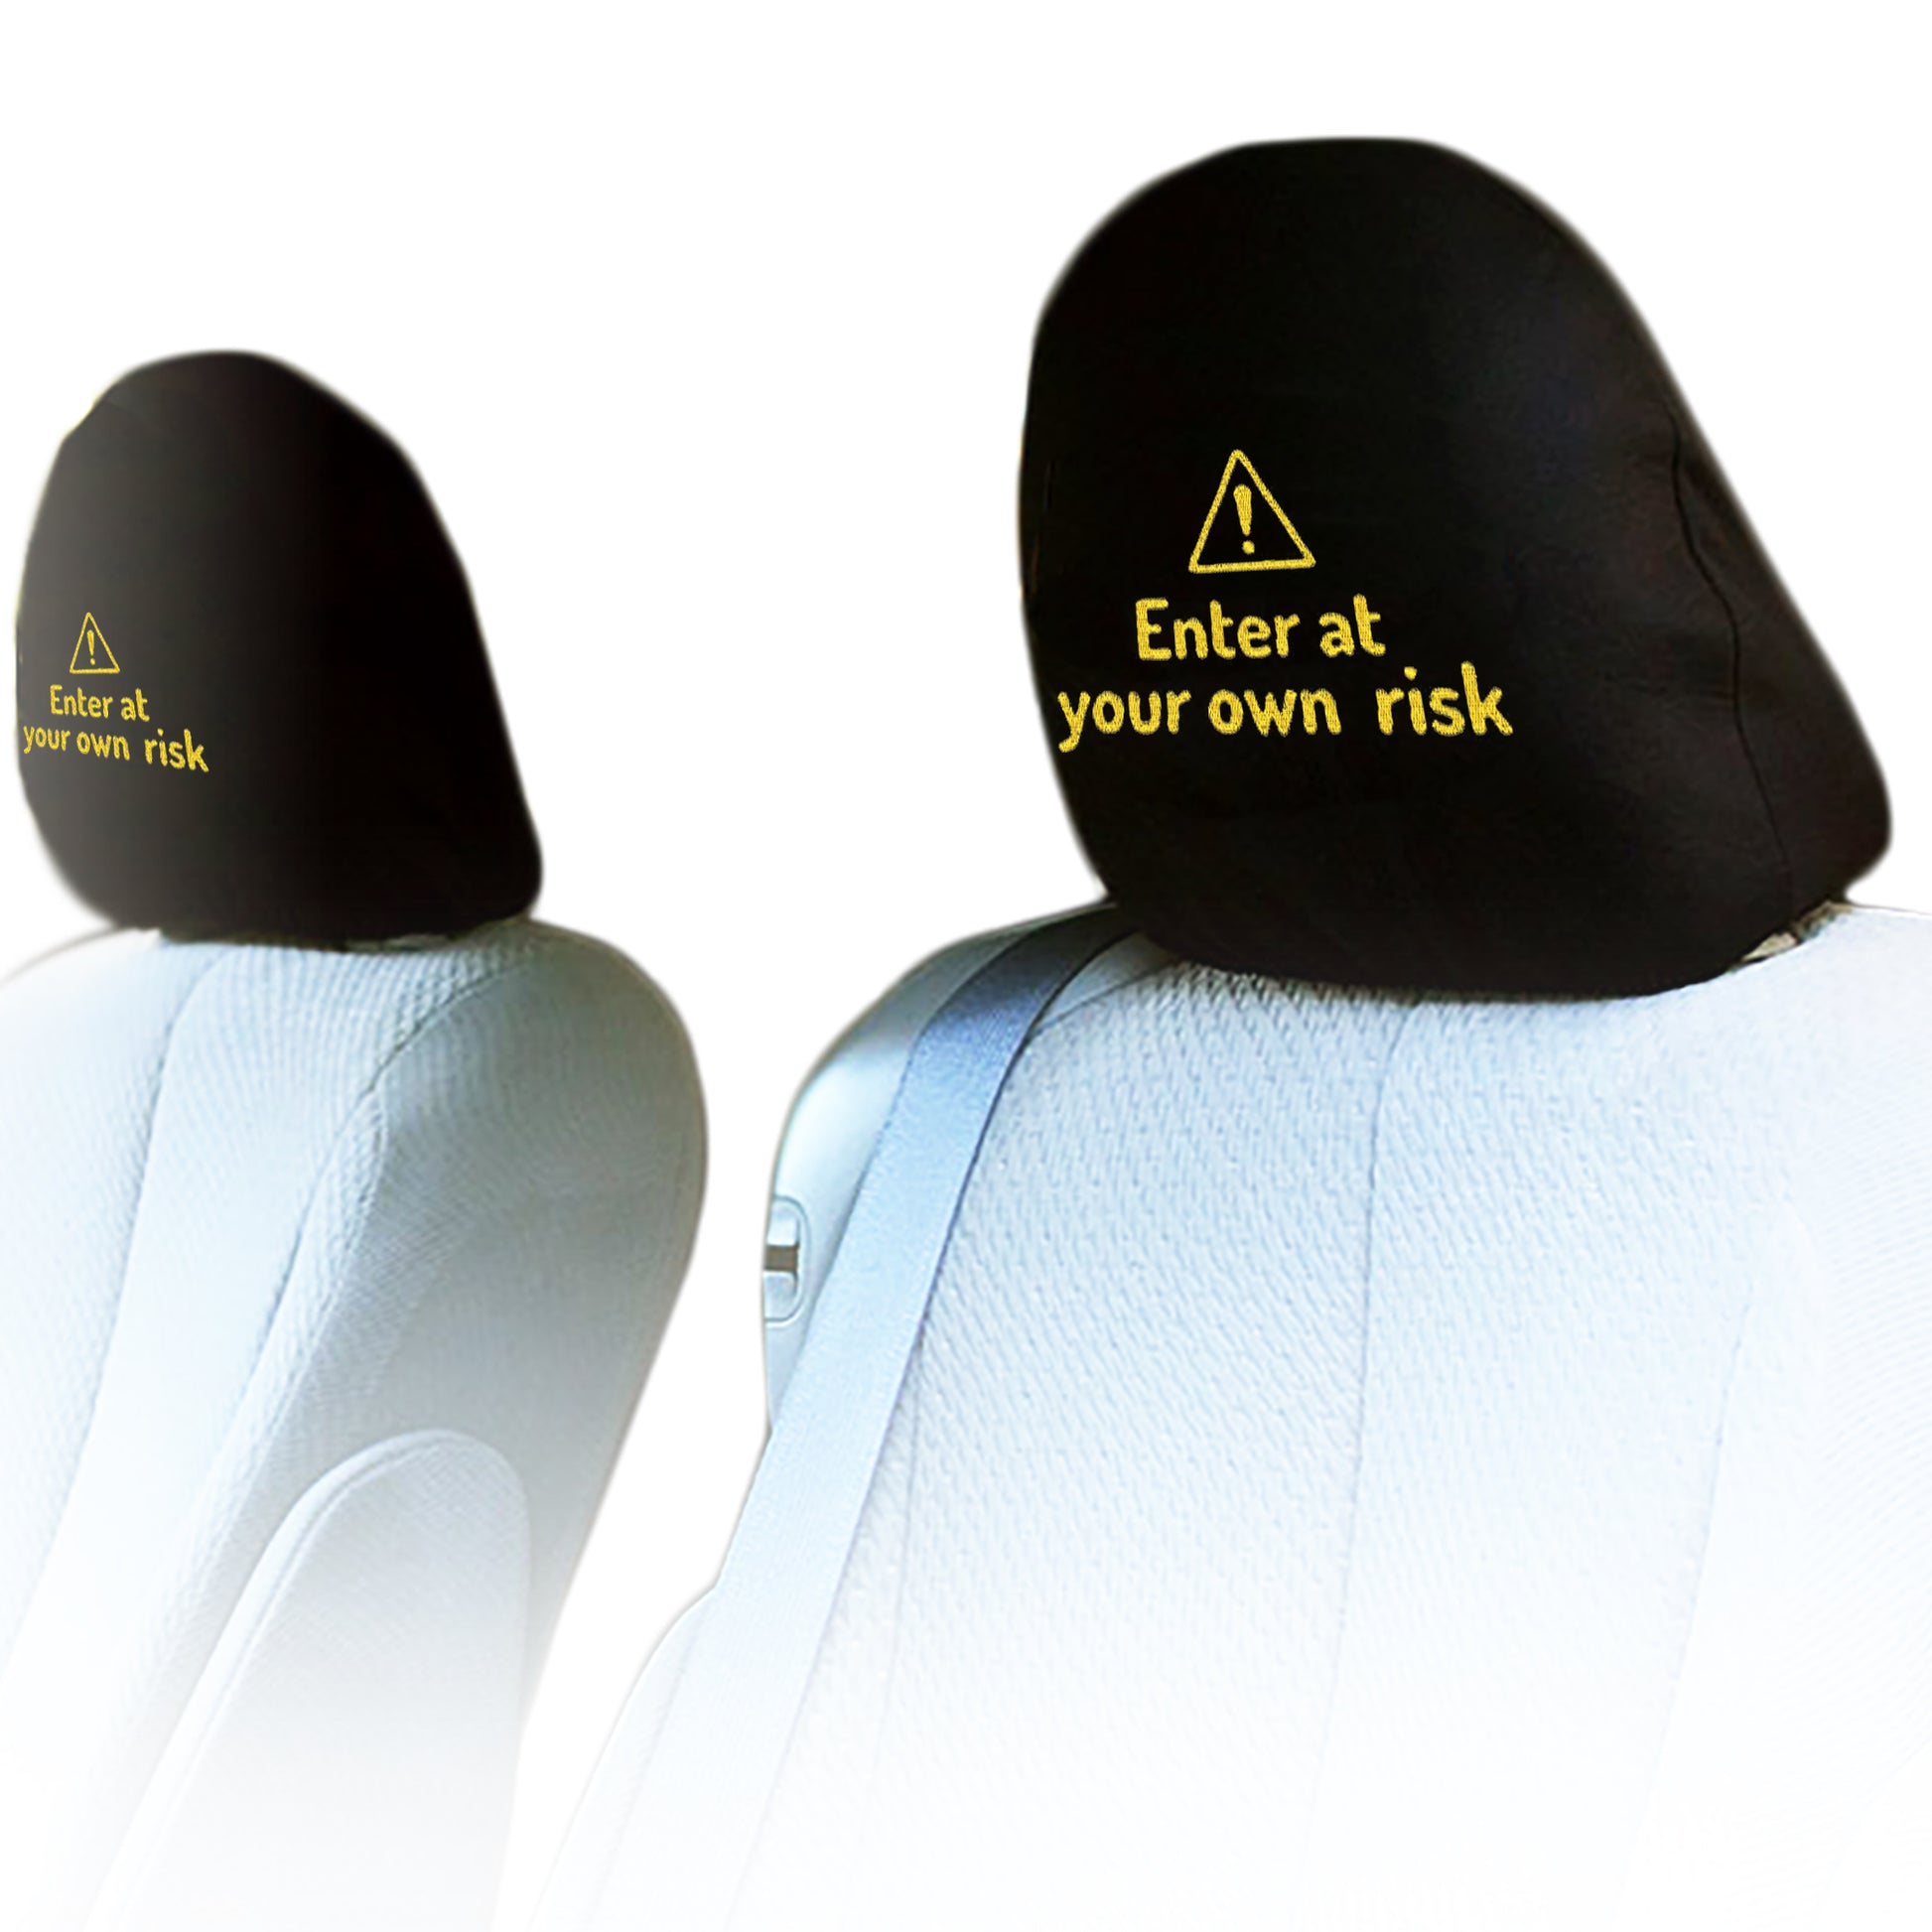 Enter at your own risk design headrest covers by pair